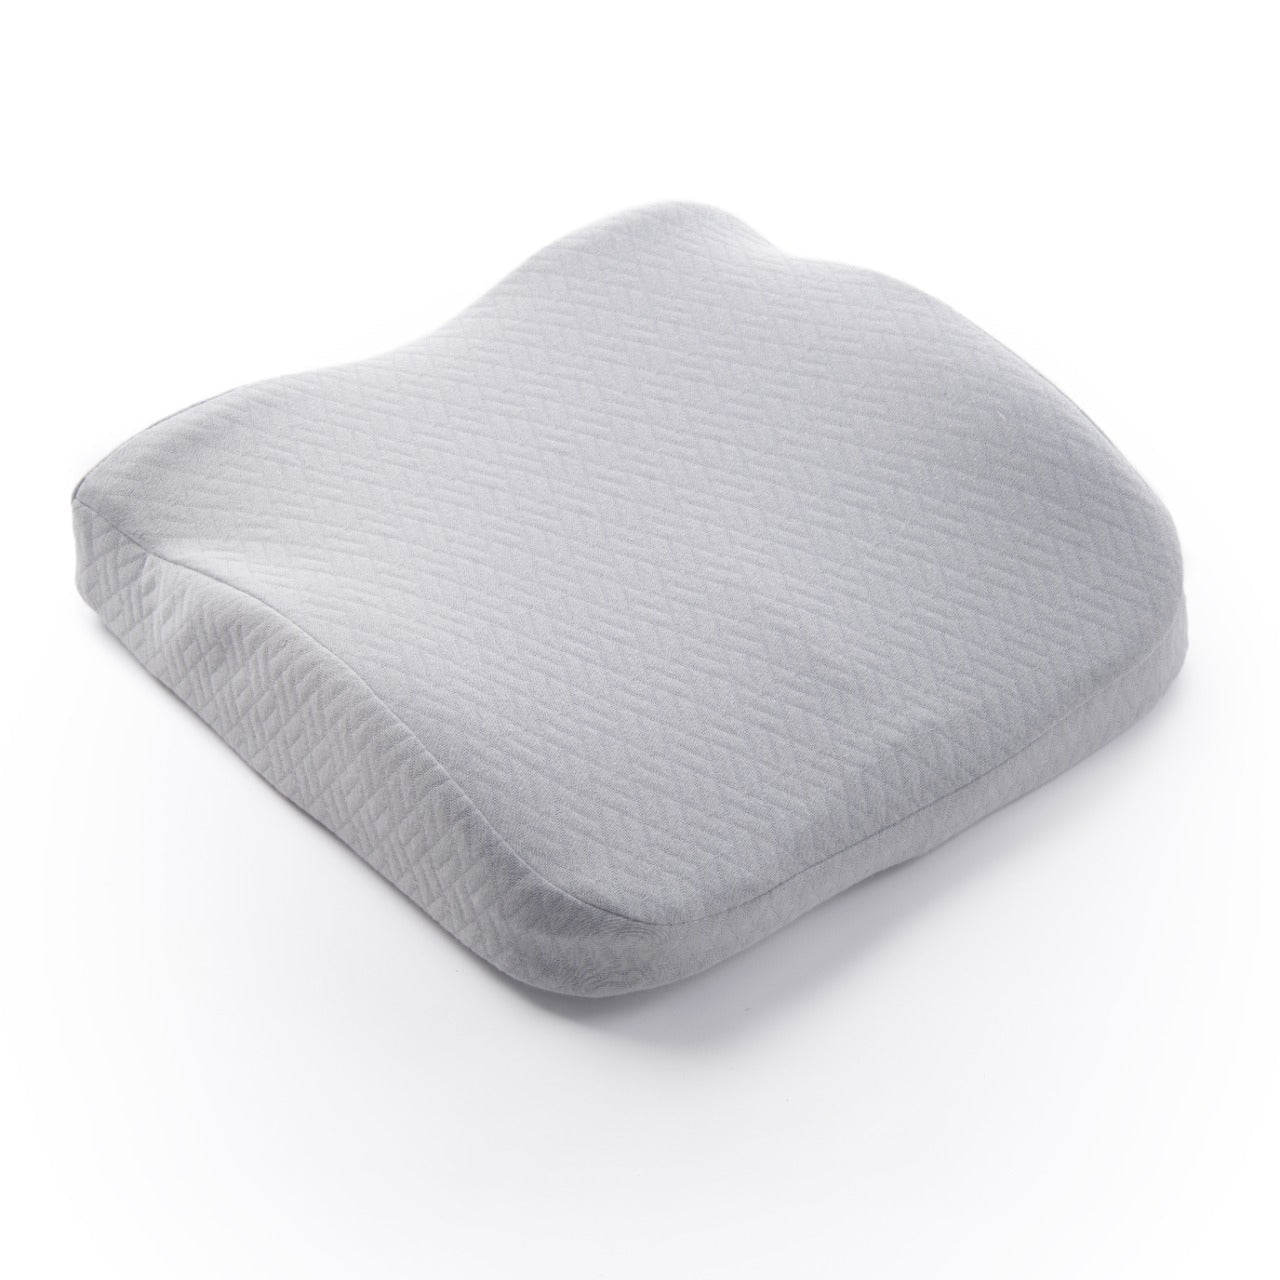 Rafo- Back Support Pillow- Black Friday Offer